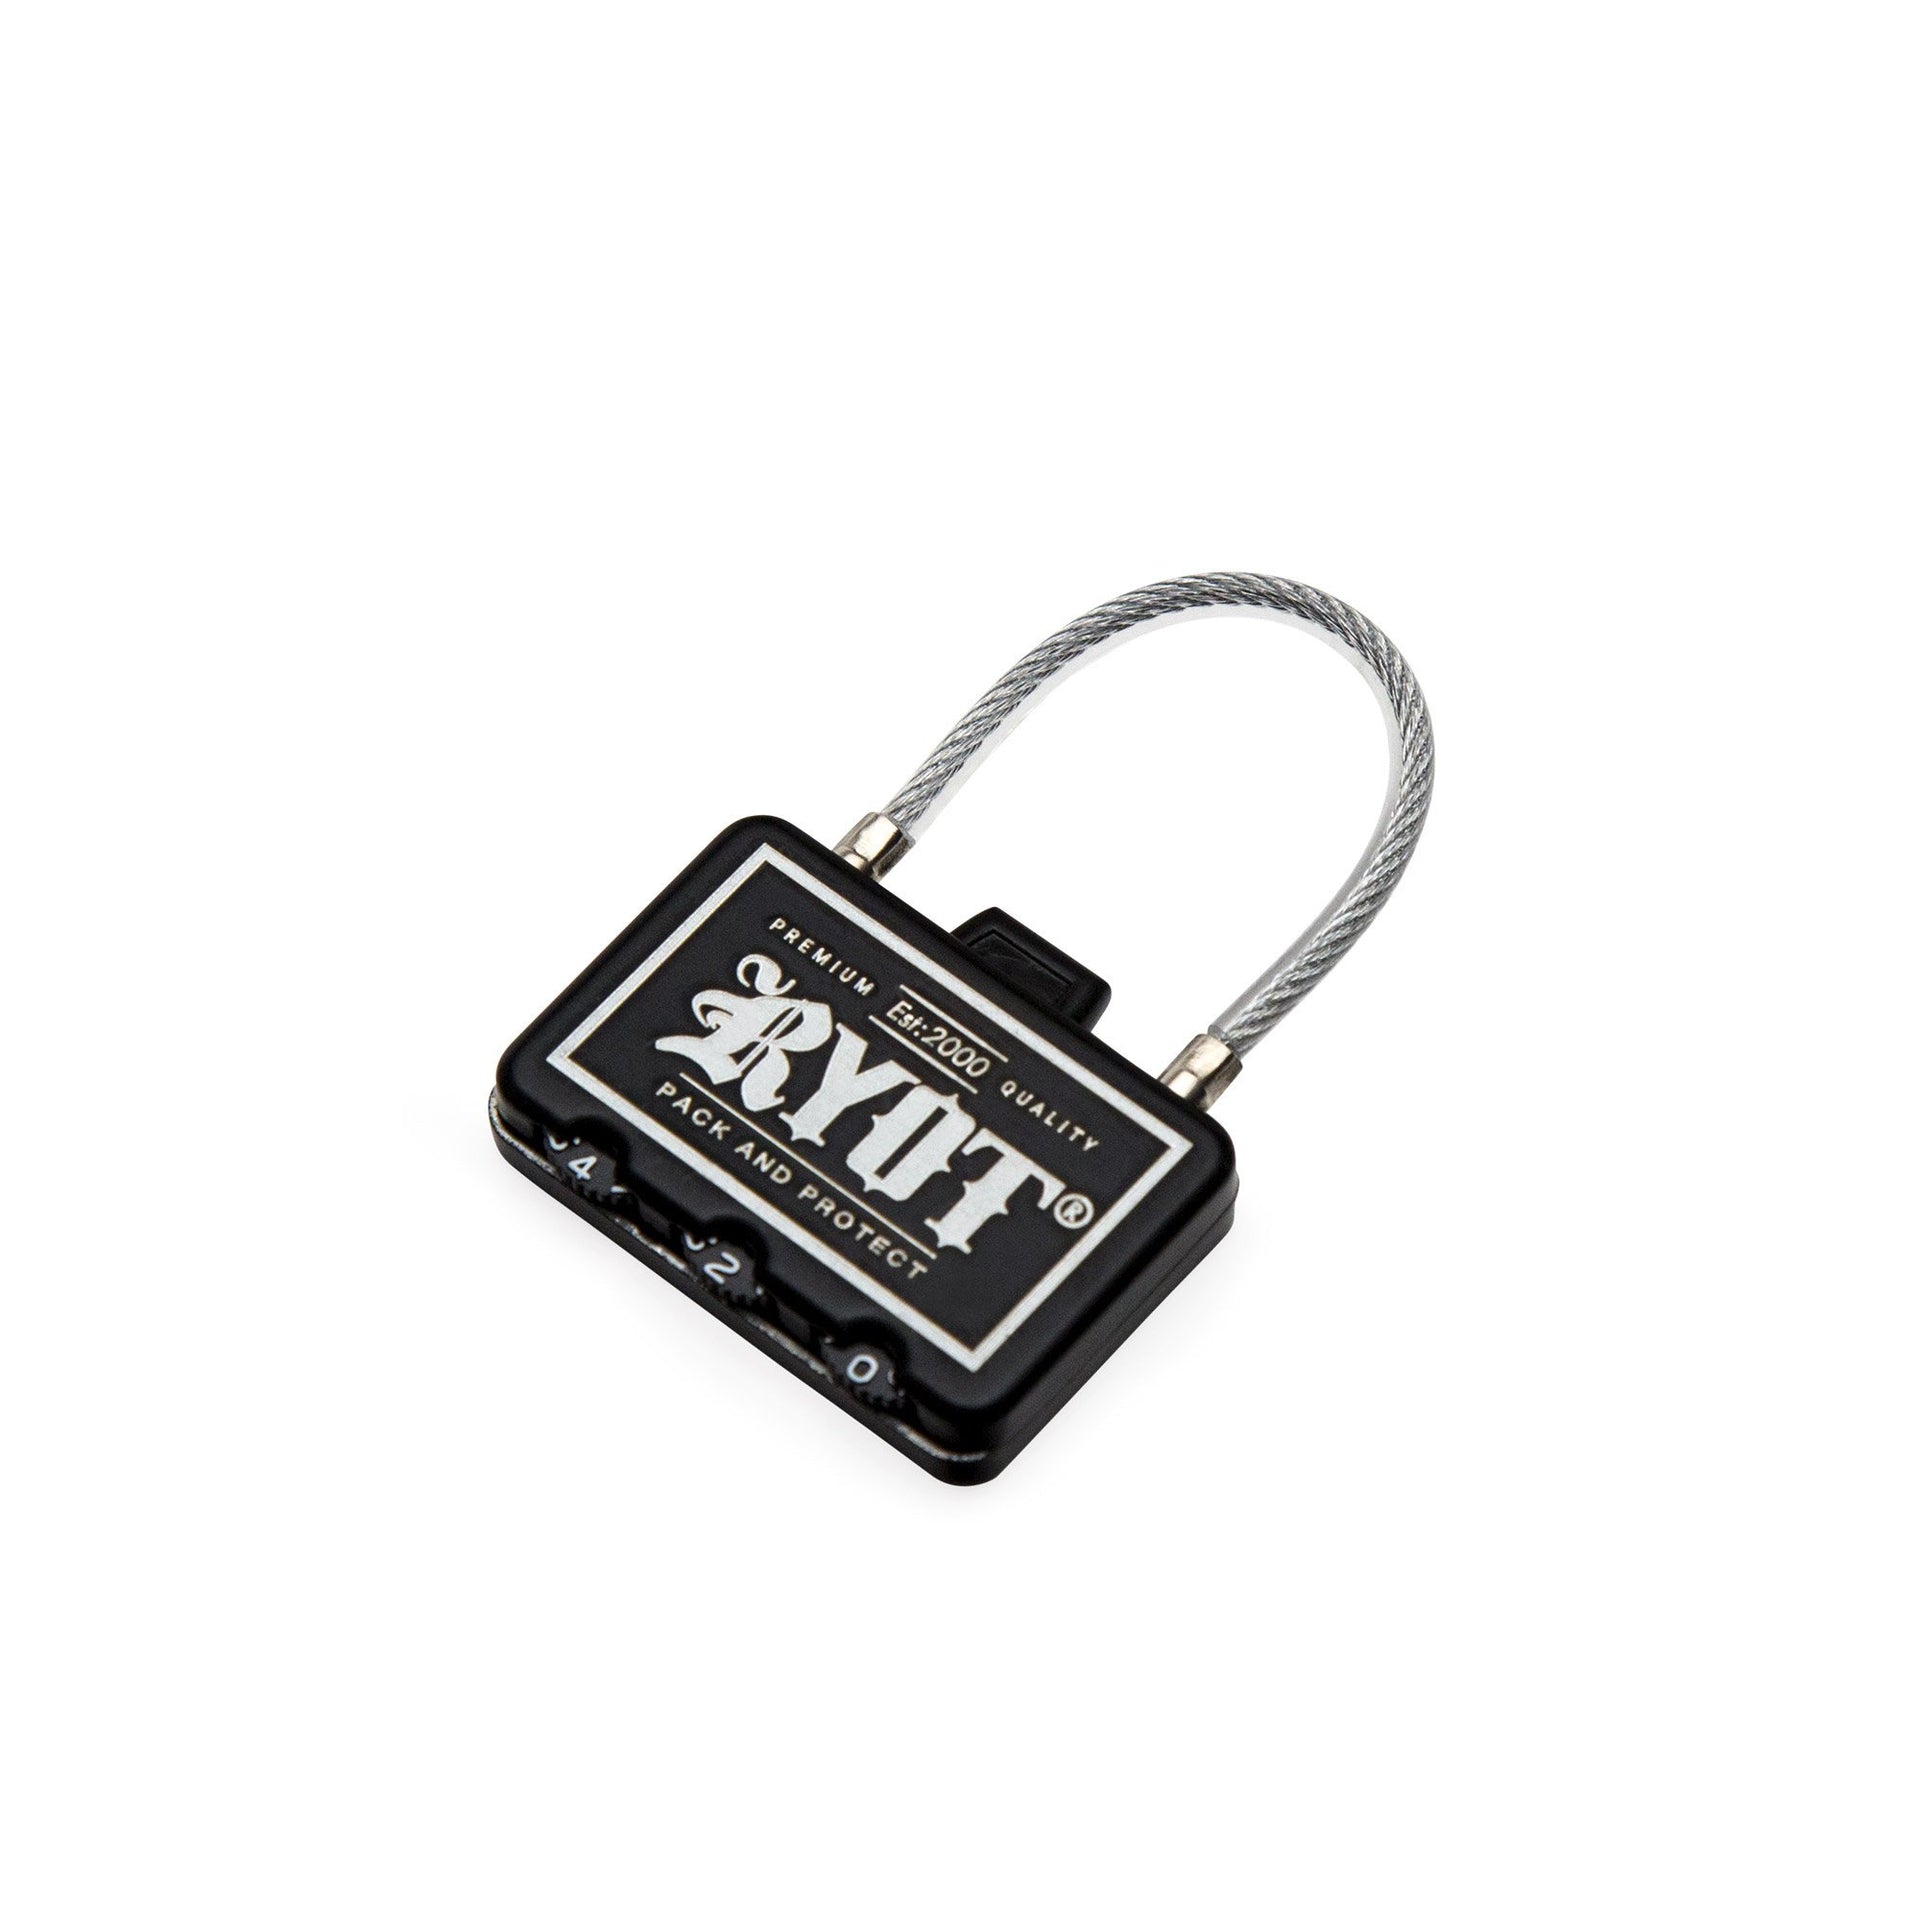 RYOT Combination Lock - 420 Science - The most trusted online smoke shop.